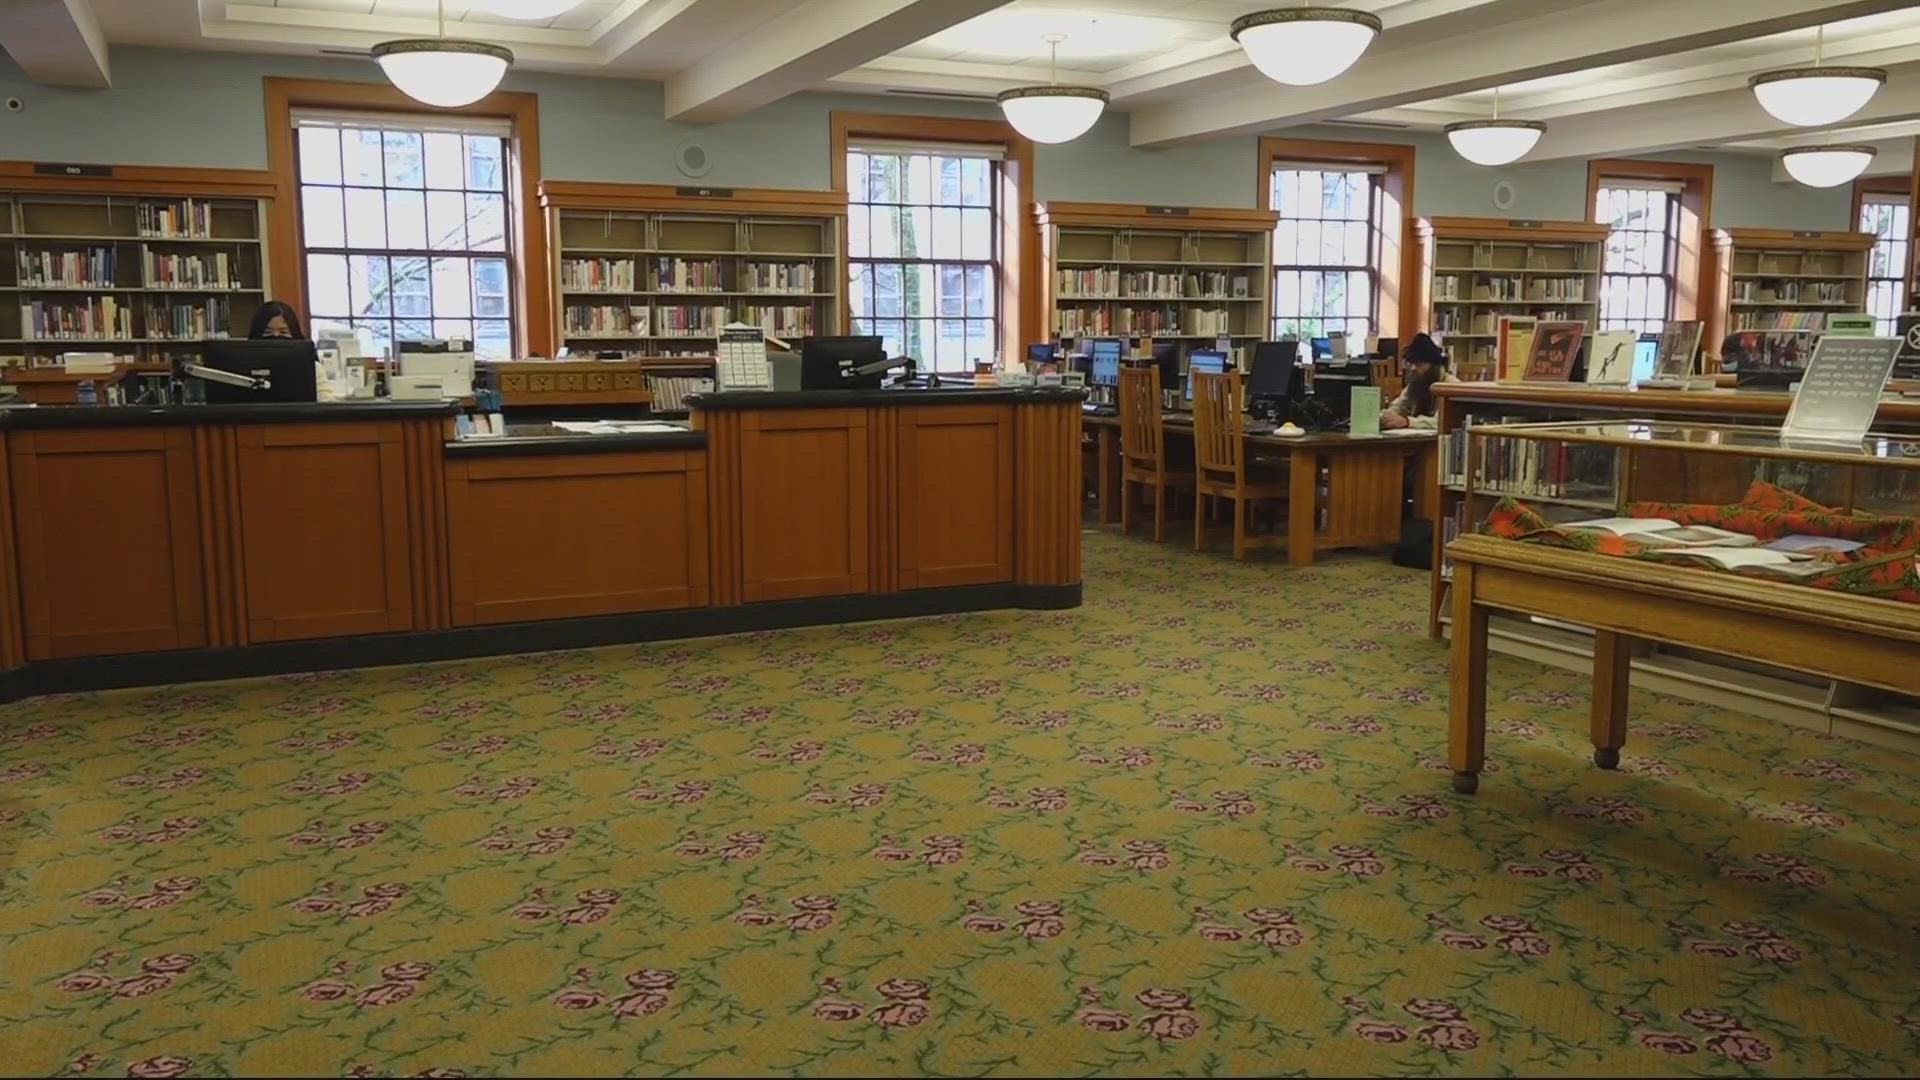 The library will be shuttered to the public starting March 11 for the second phase of the overhaul. It’s bankrolled by a voter-approved bond from 2020.